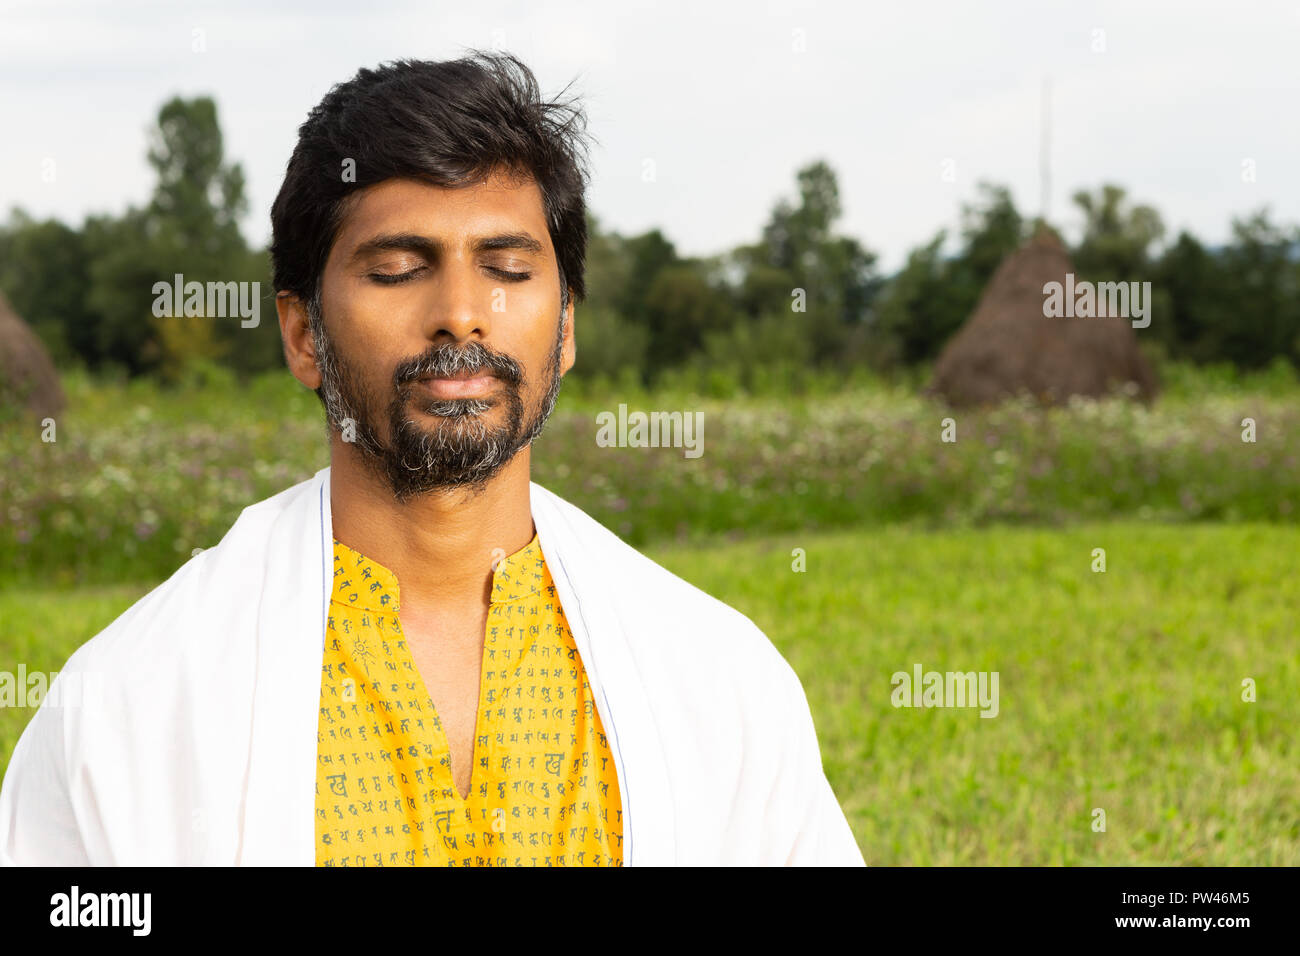 Indian male person or yogi close-up of calm expression with eyes closed wearing white over yellow shirt with natural background Stock Photo